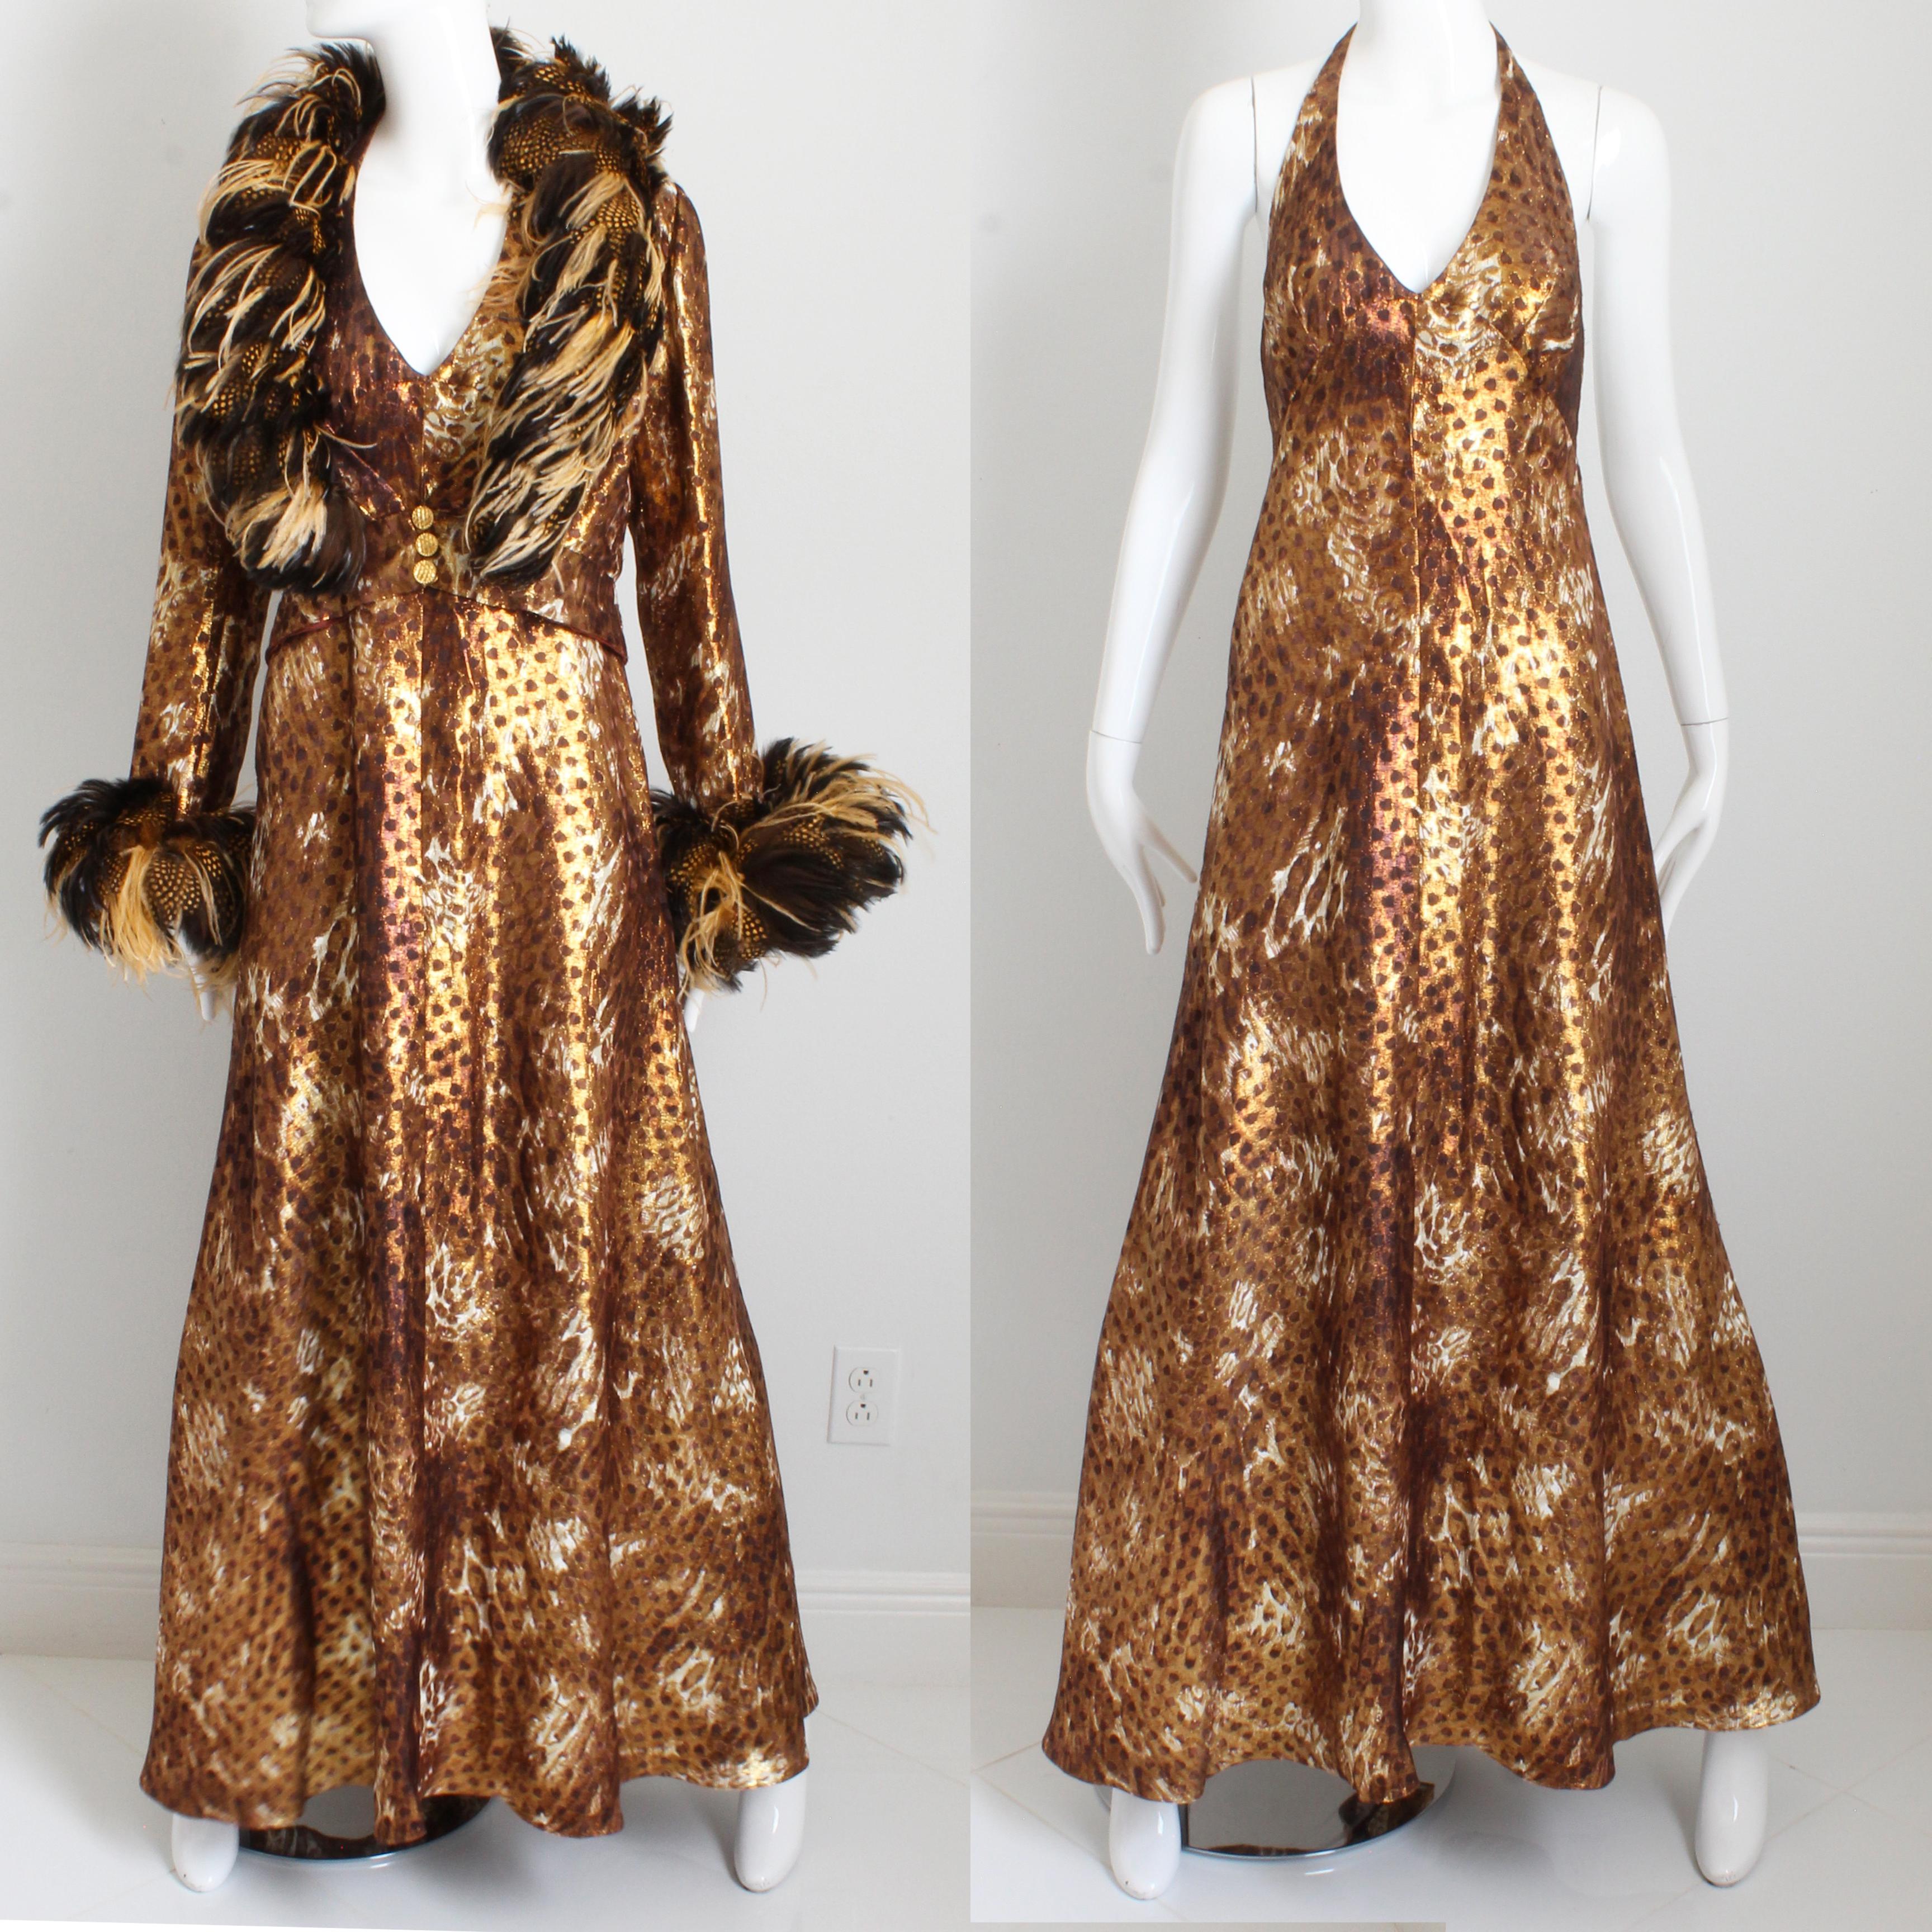 Authentic, preowned, vintage Bob Mackie x Ray Aghayan 2-piece halter evening gown with matching feather trim cropped jacket, likely made in the 1970s.  The halter dress is floor length and made from a bronze-hued metallic or lame' abstract animal